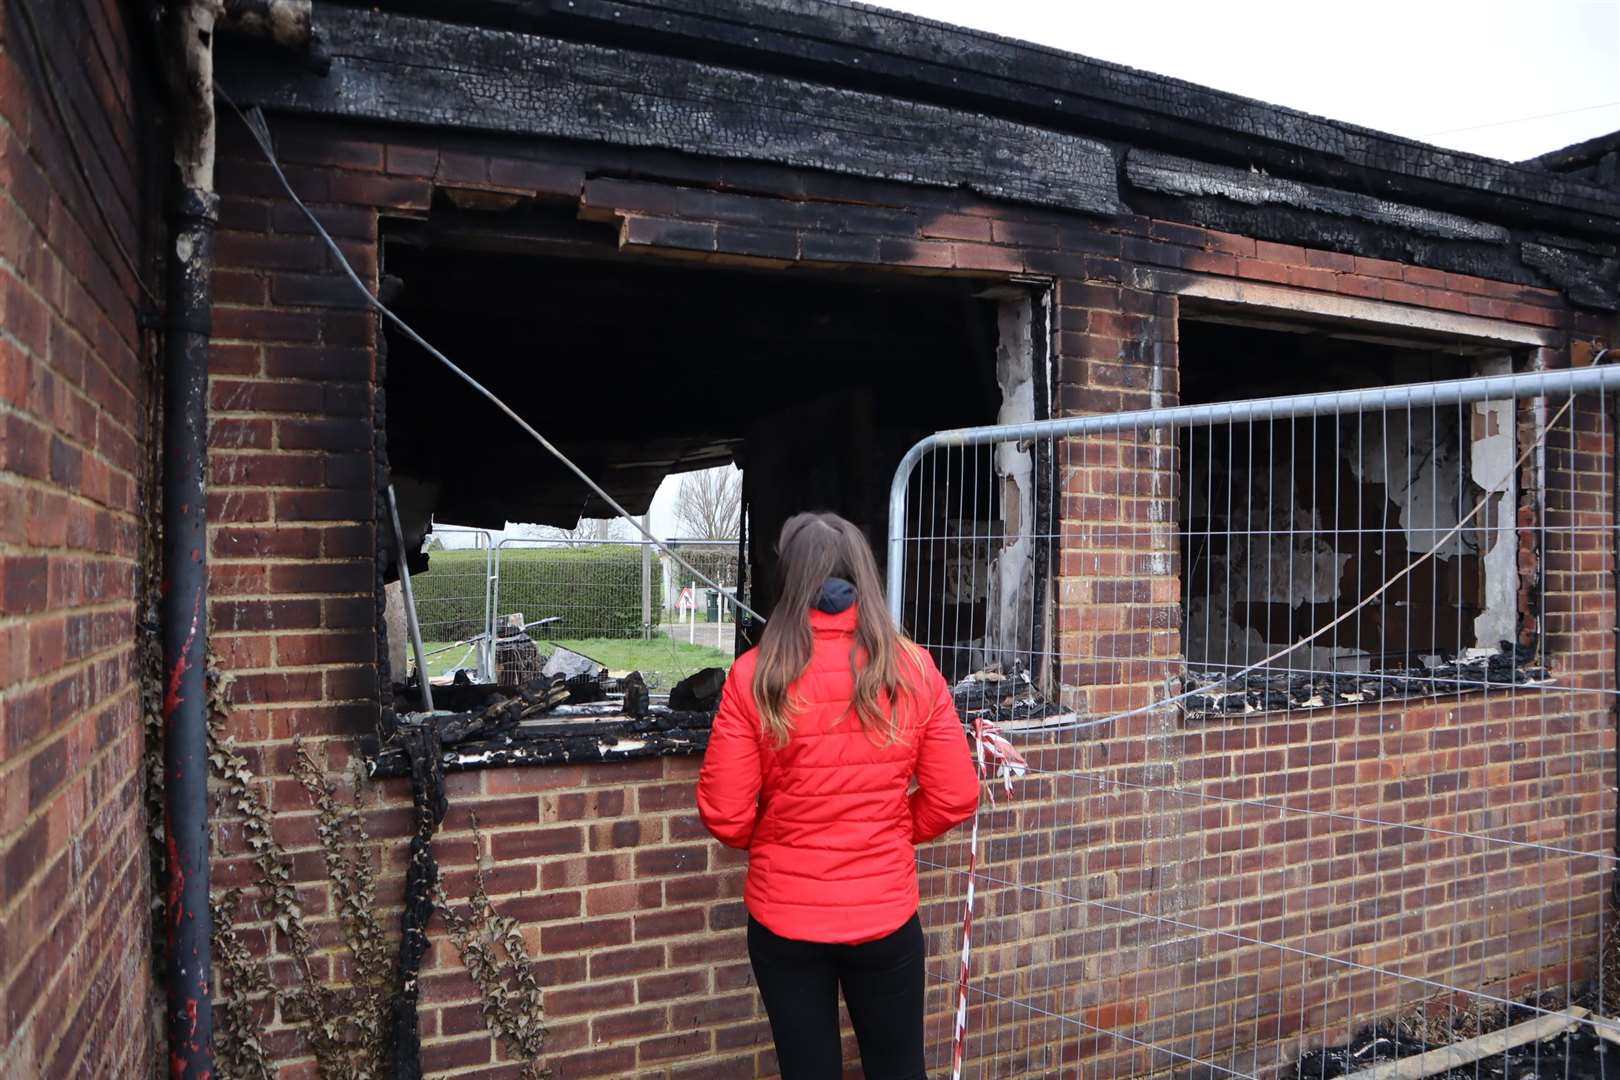 Deni Kerswell, 20, surveys the damage after the chalet fire in Leysdown, Sheppey